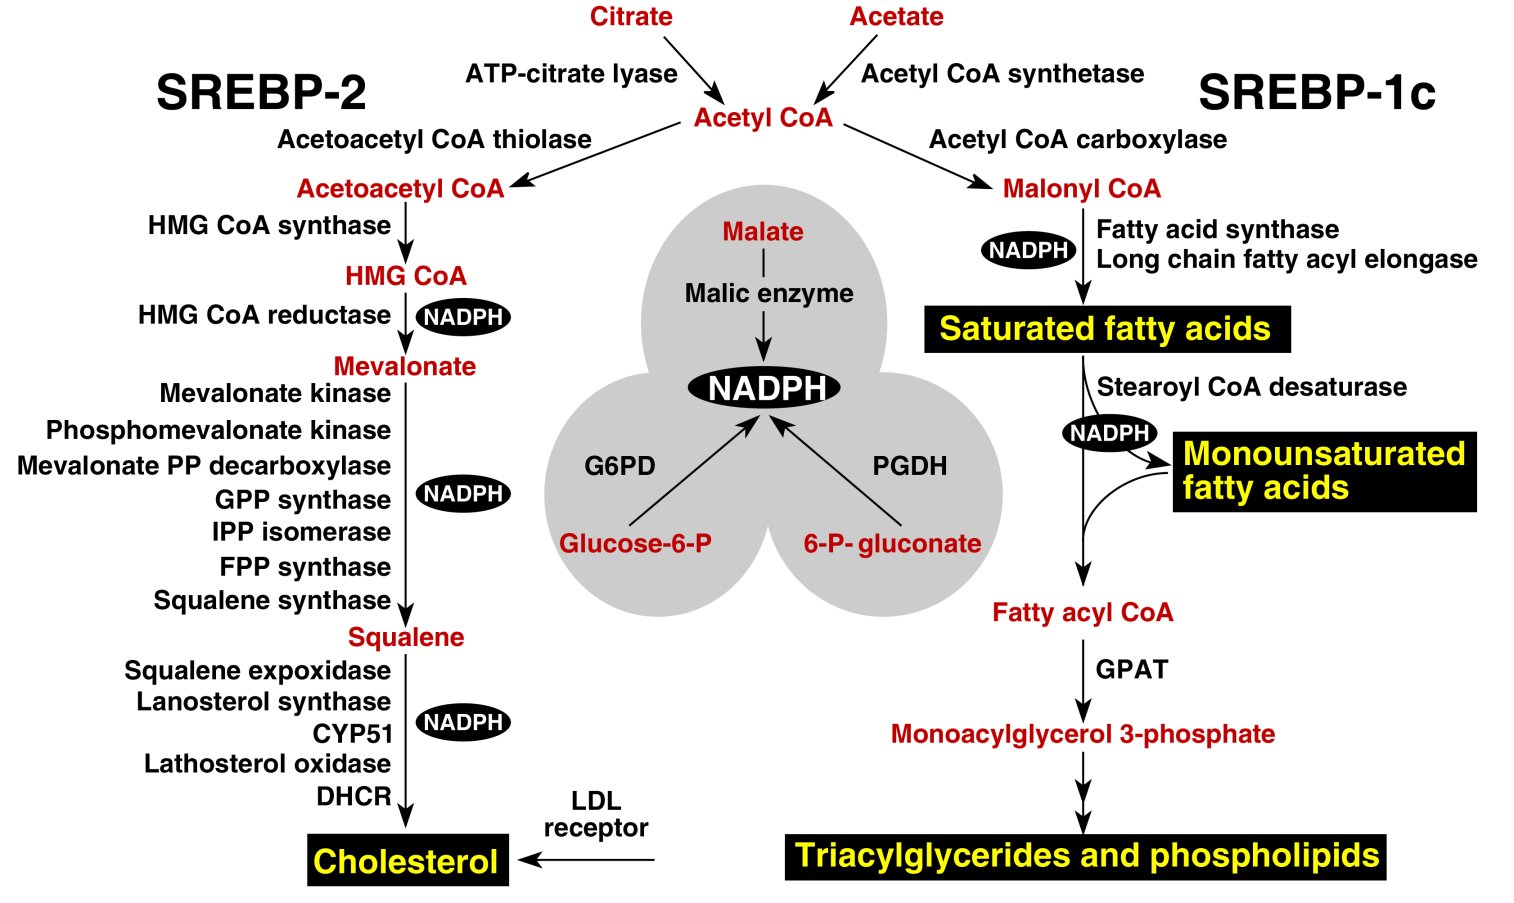 a diagram of a biochemical pathway, including the proteins and products created in the process of making cholesterol